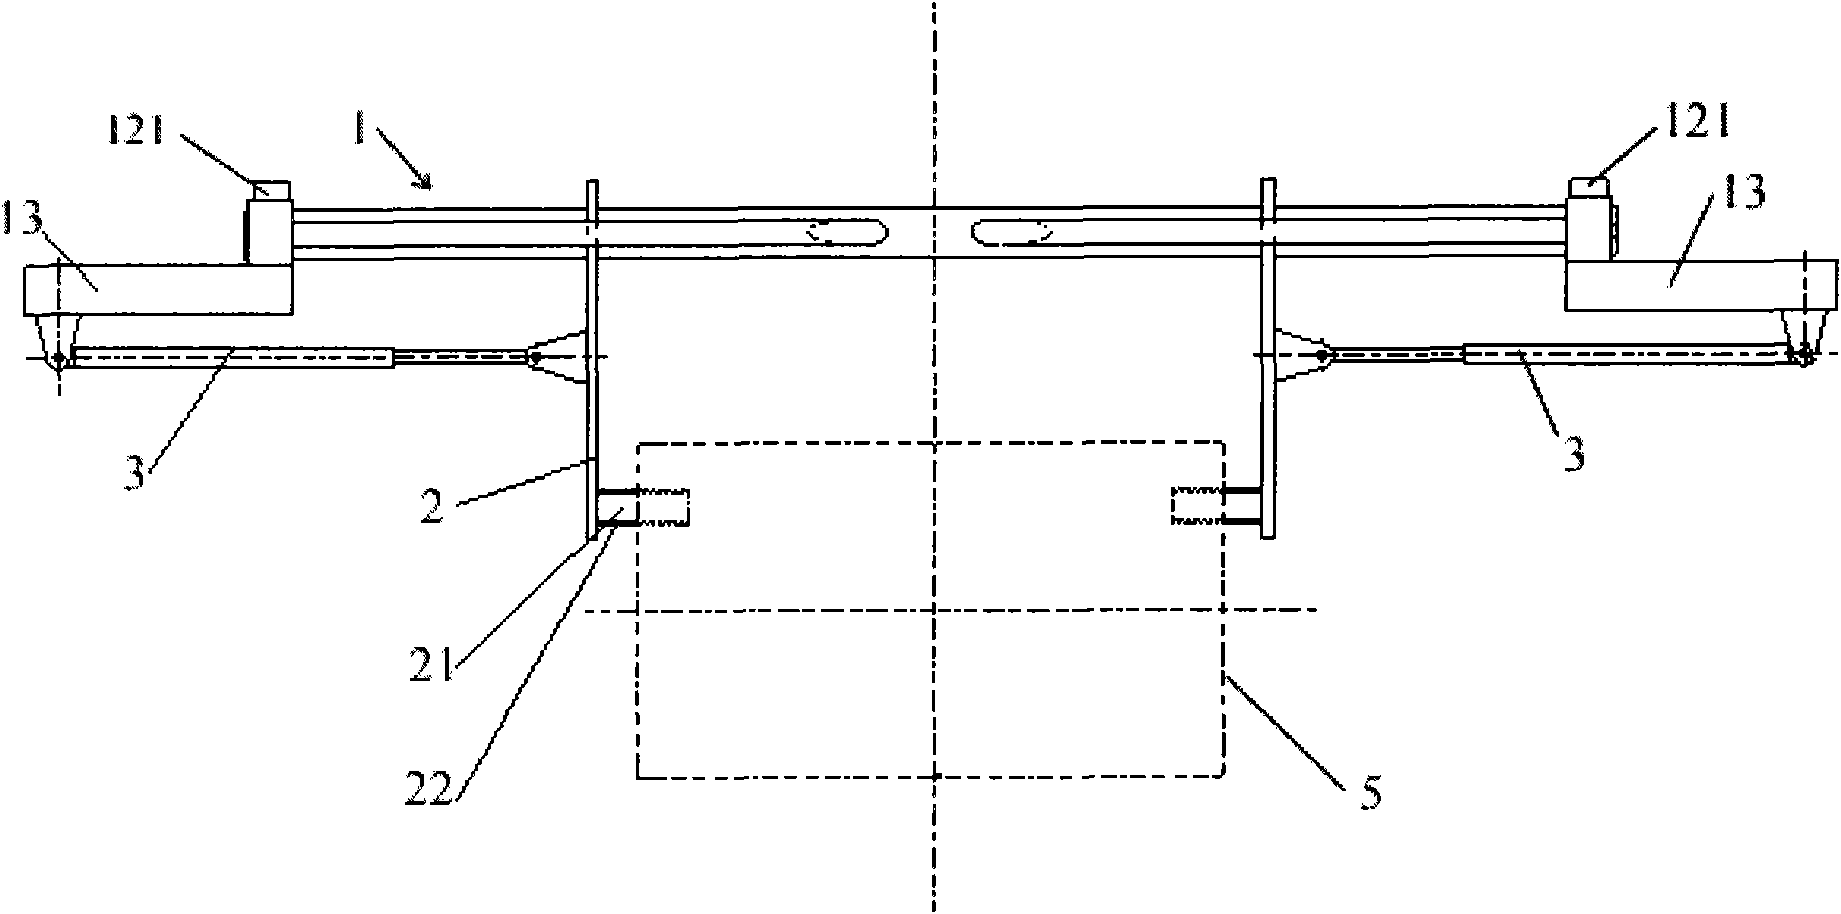 Hanger for lifting tubes and lifting equipment with same